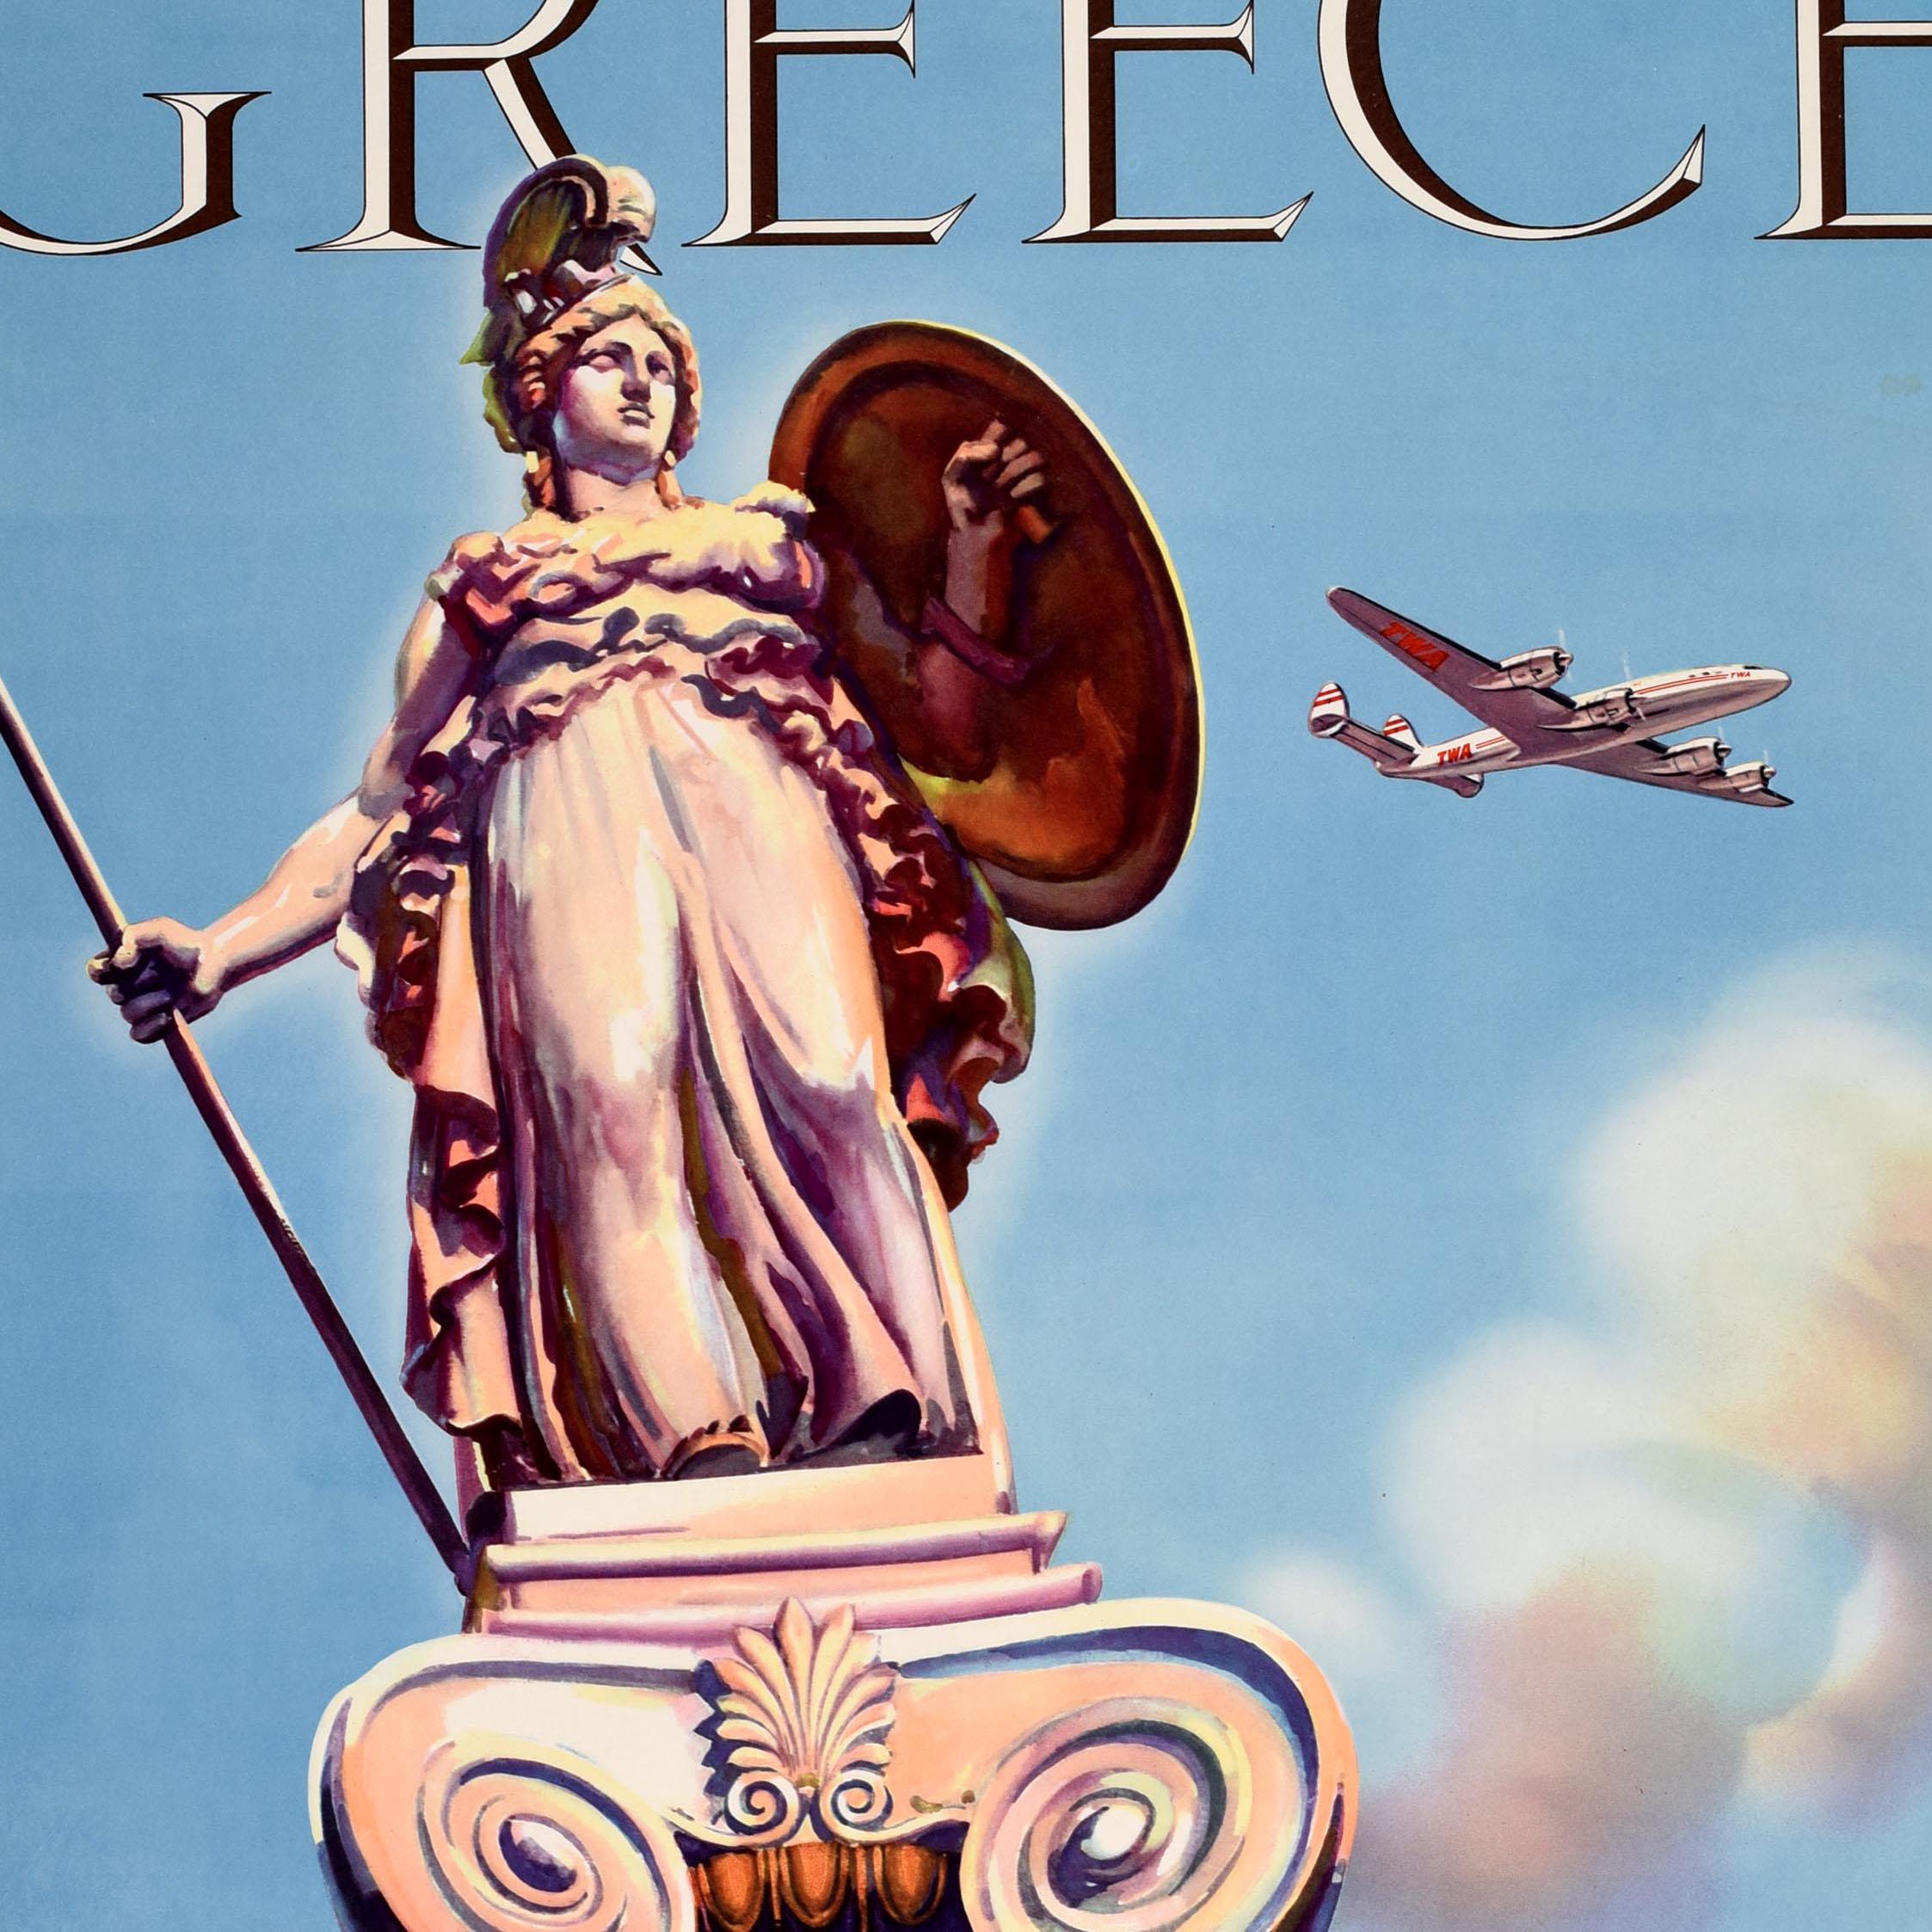 Original vintage travel poster - Fly TWA Greece Trans World Airlines - features a statue of the ancient Greek goddess Athena holding a shield and spear on top of a decorative column (one of two statues in the Academy of Athens as the city's patron)